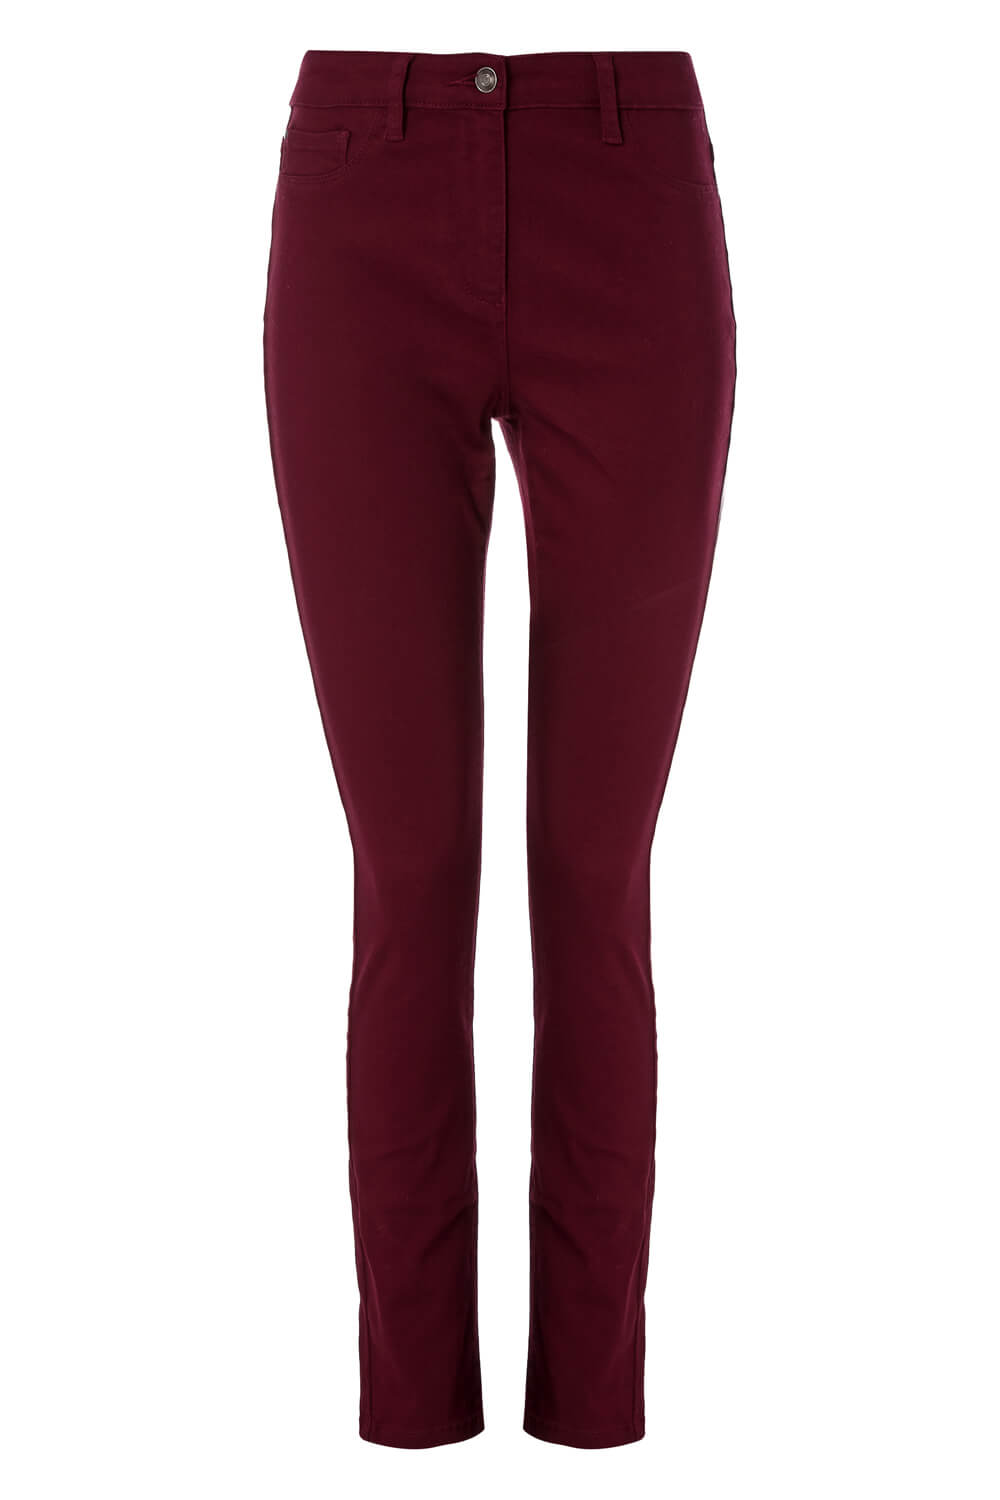 Berry Red Slim Fit Jeans , Image 4 of 4